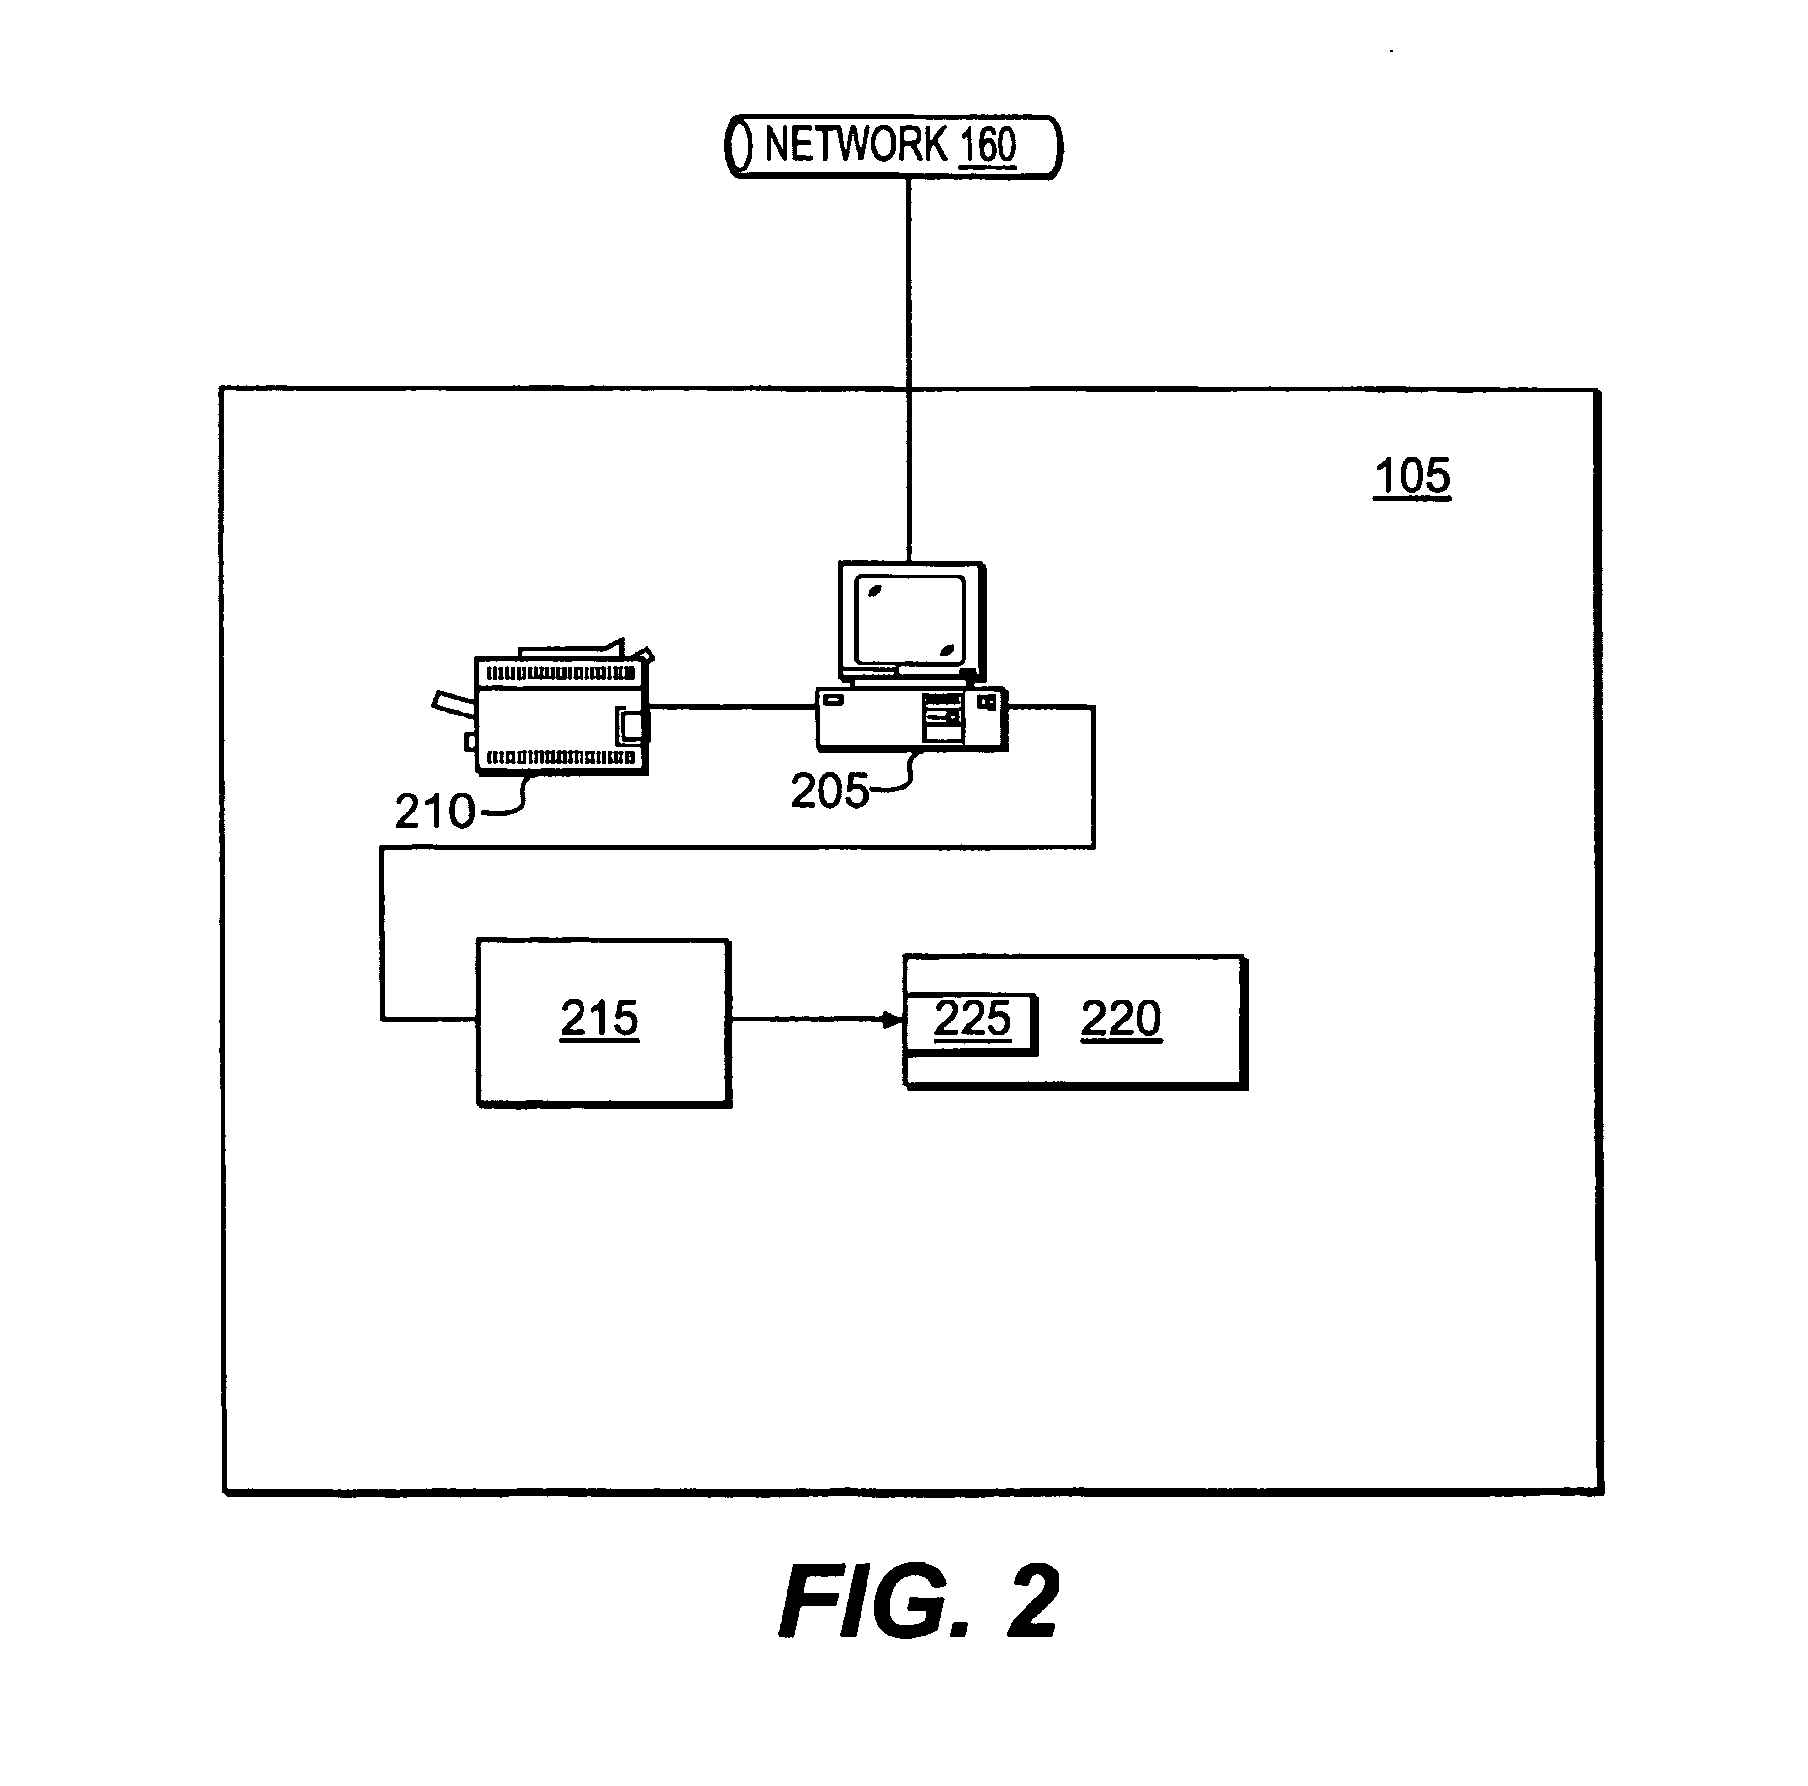 Systems and methods for processing items in an item delivery system